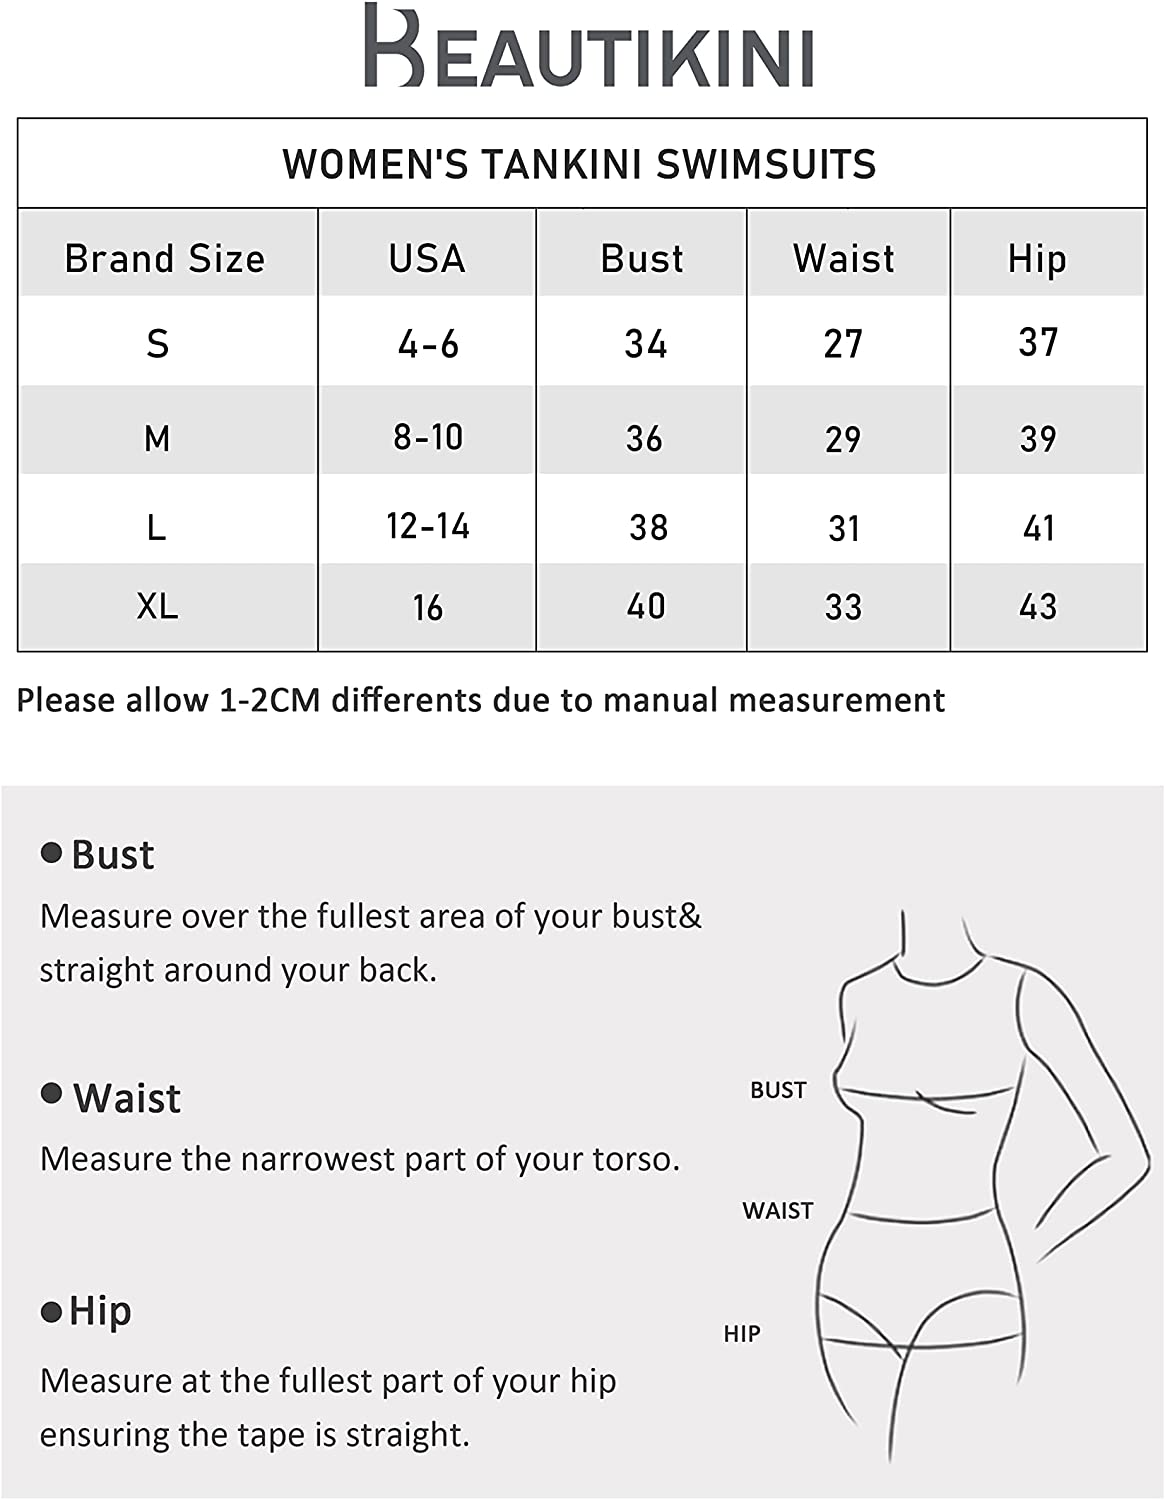 Beautikini Womens Two Piece Swimsuits, High Neck Bikini Crop Top Floral Sport Bathing Suits with Briefs for Women Teen Junior